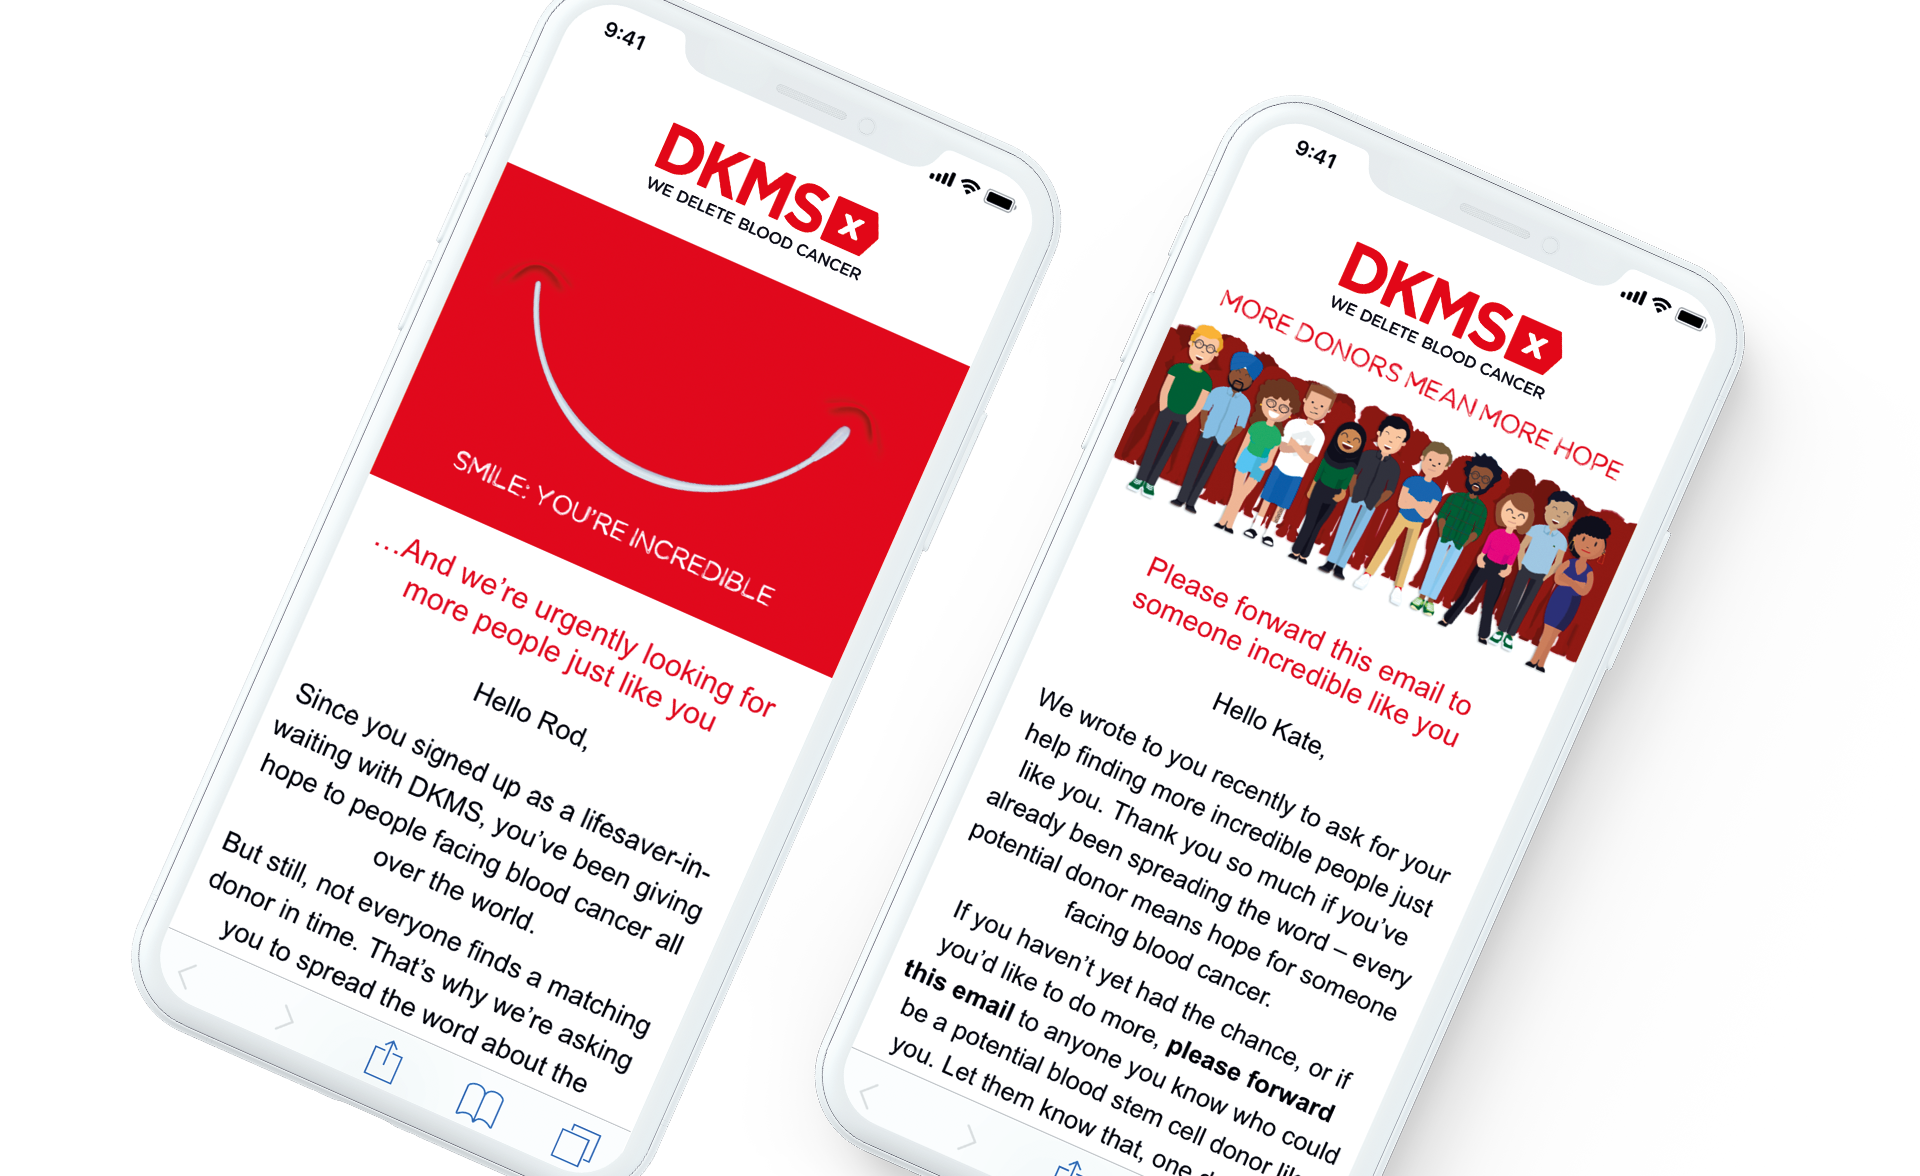 DKMS_MOBILES